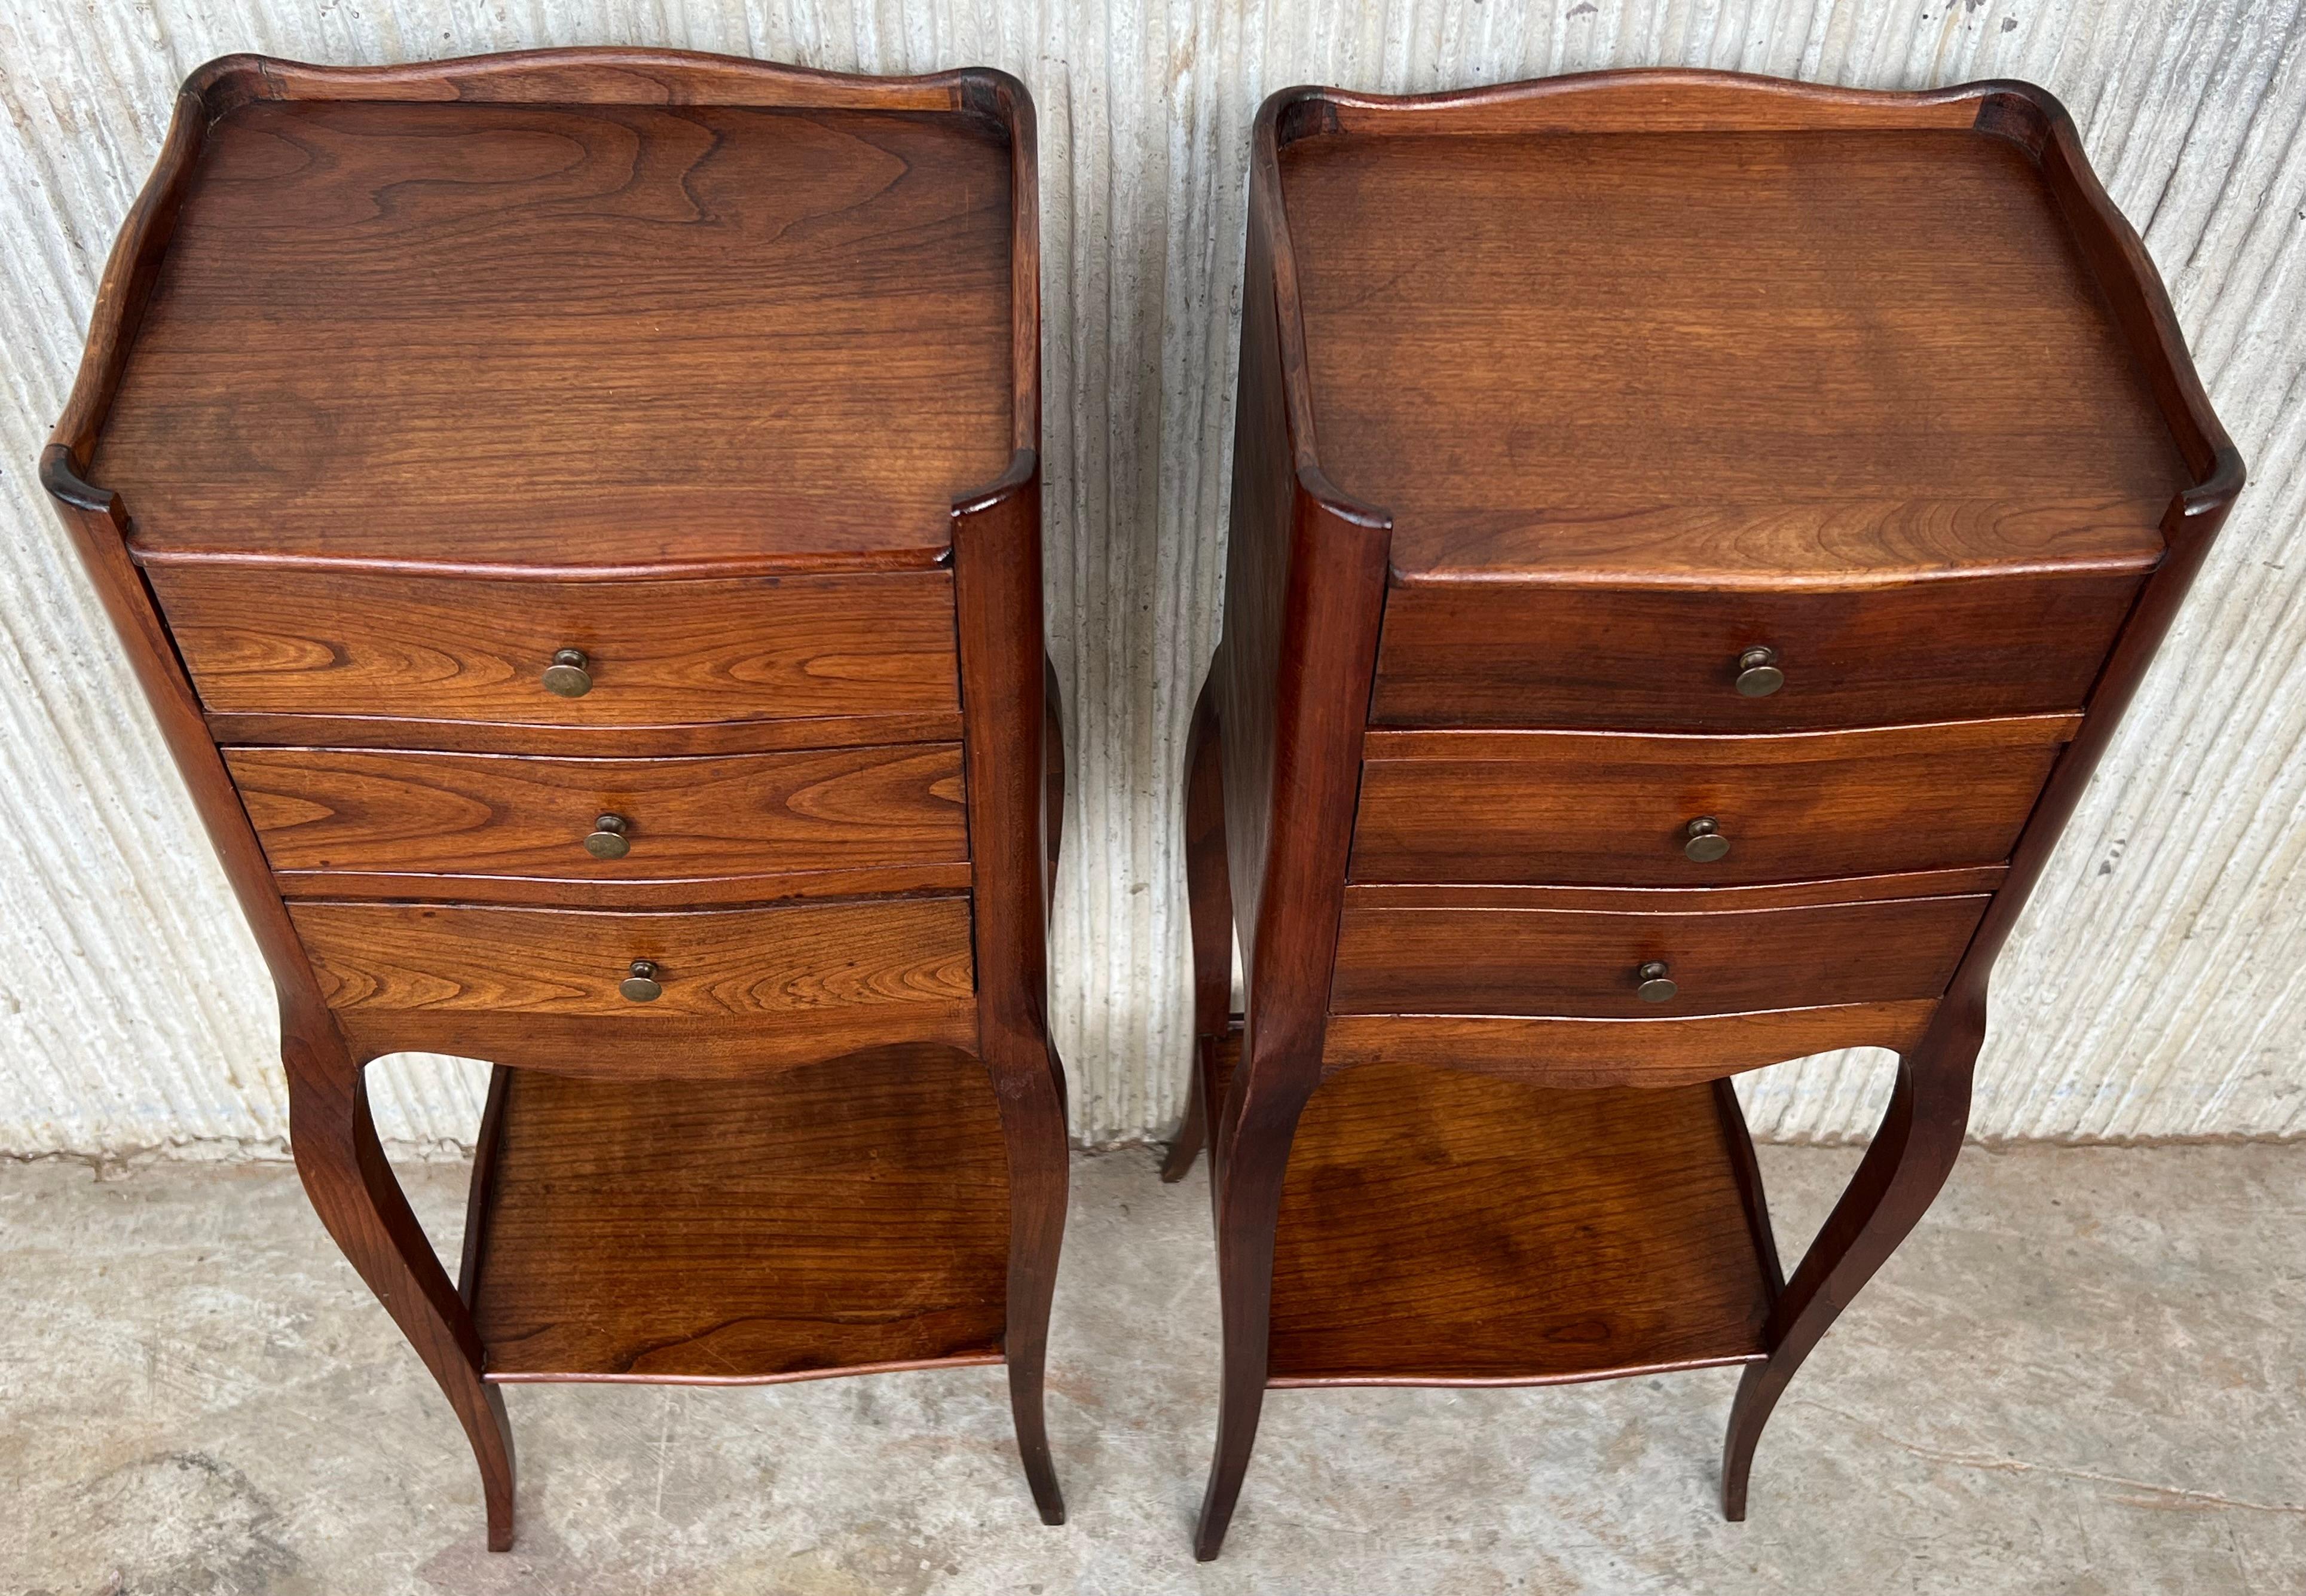 19th Century Pair of French Louis XV Style Walnut Bedside Tables with Three Drawers and Shelv